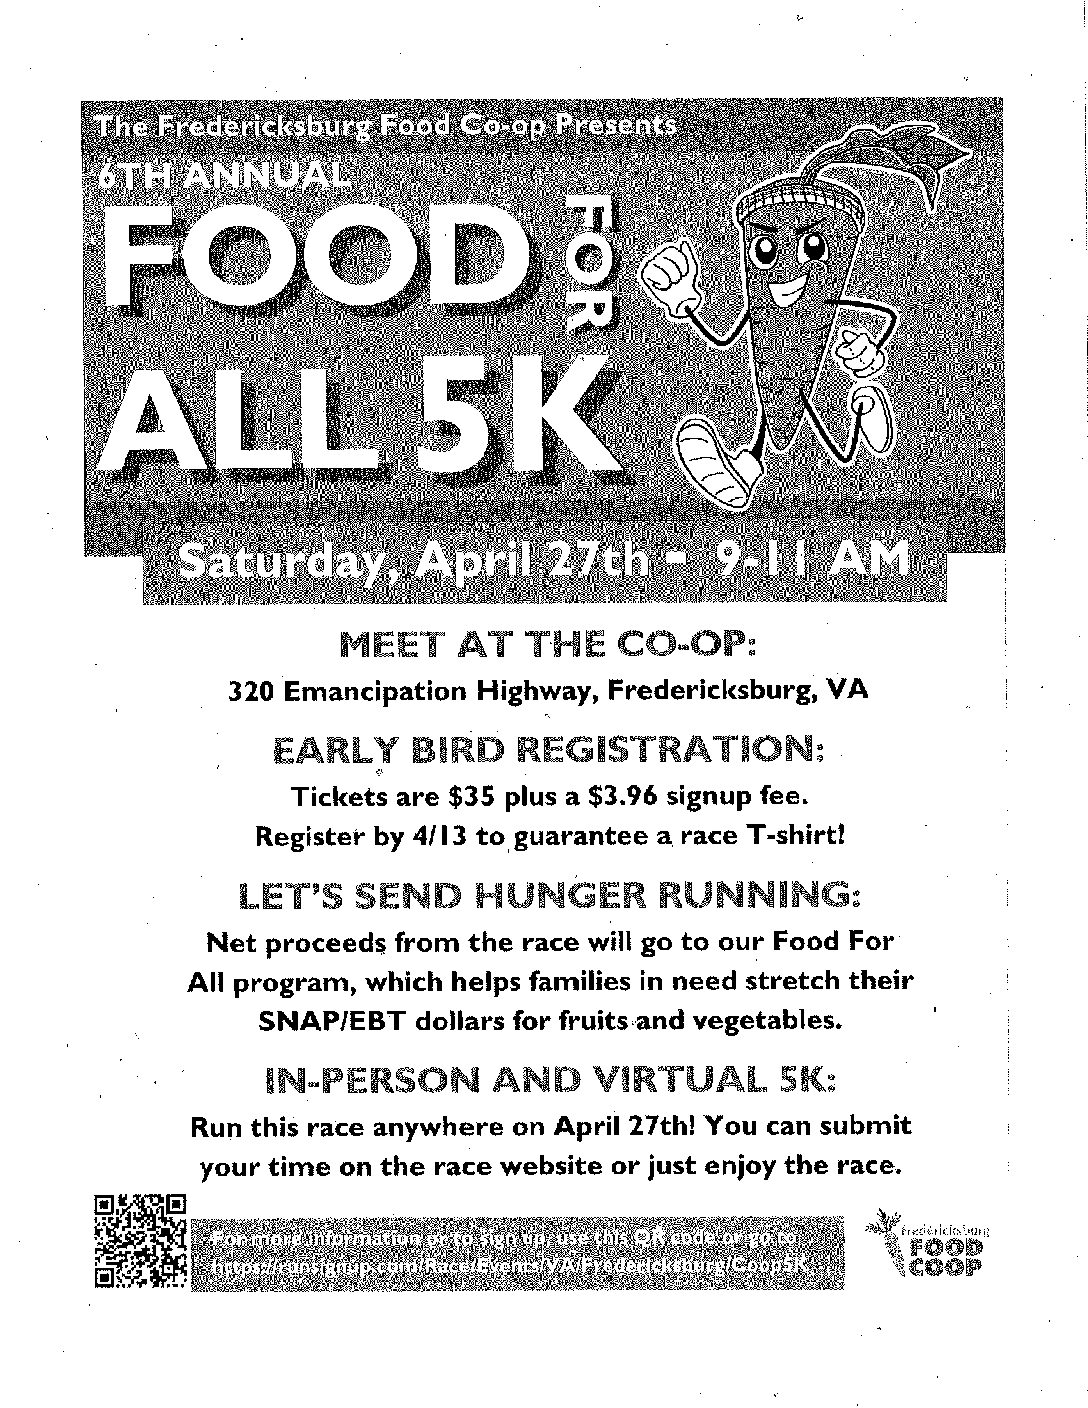 Food for All 5K